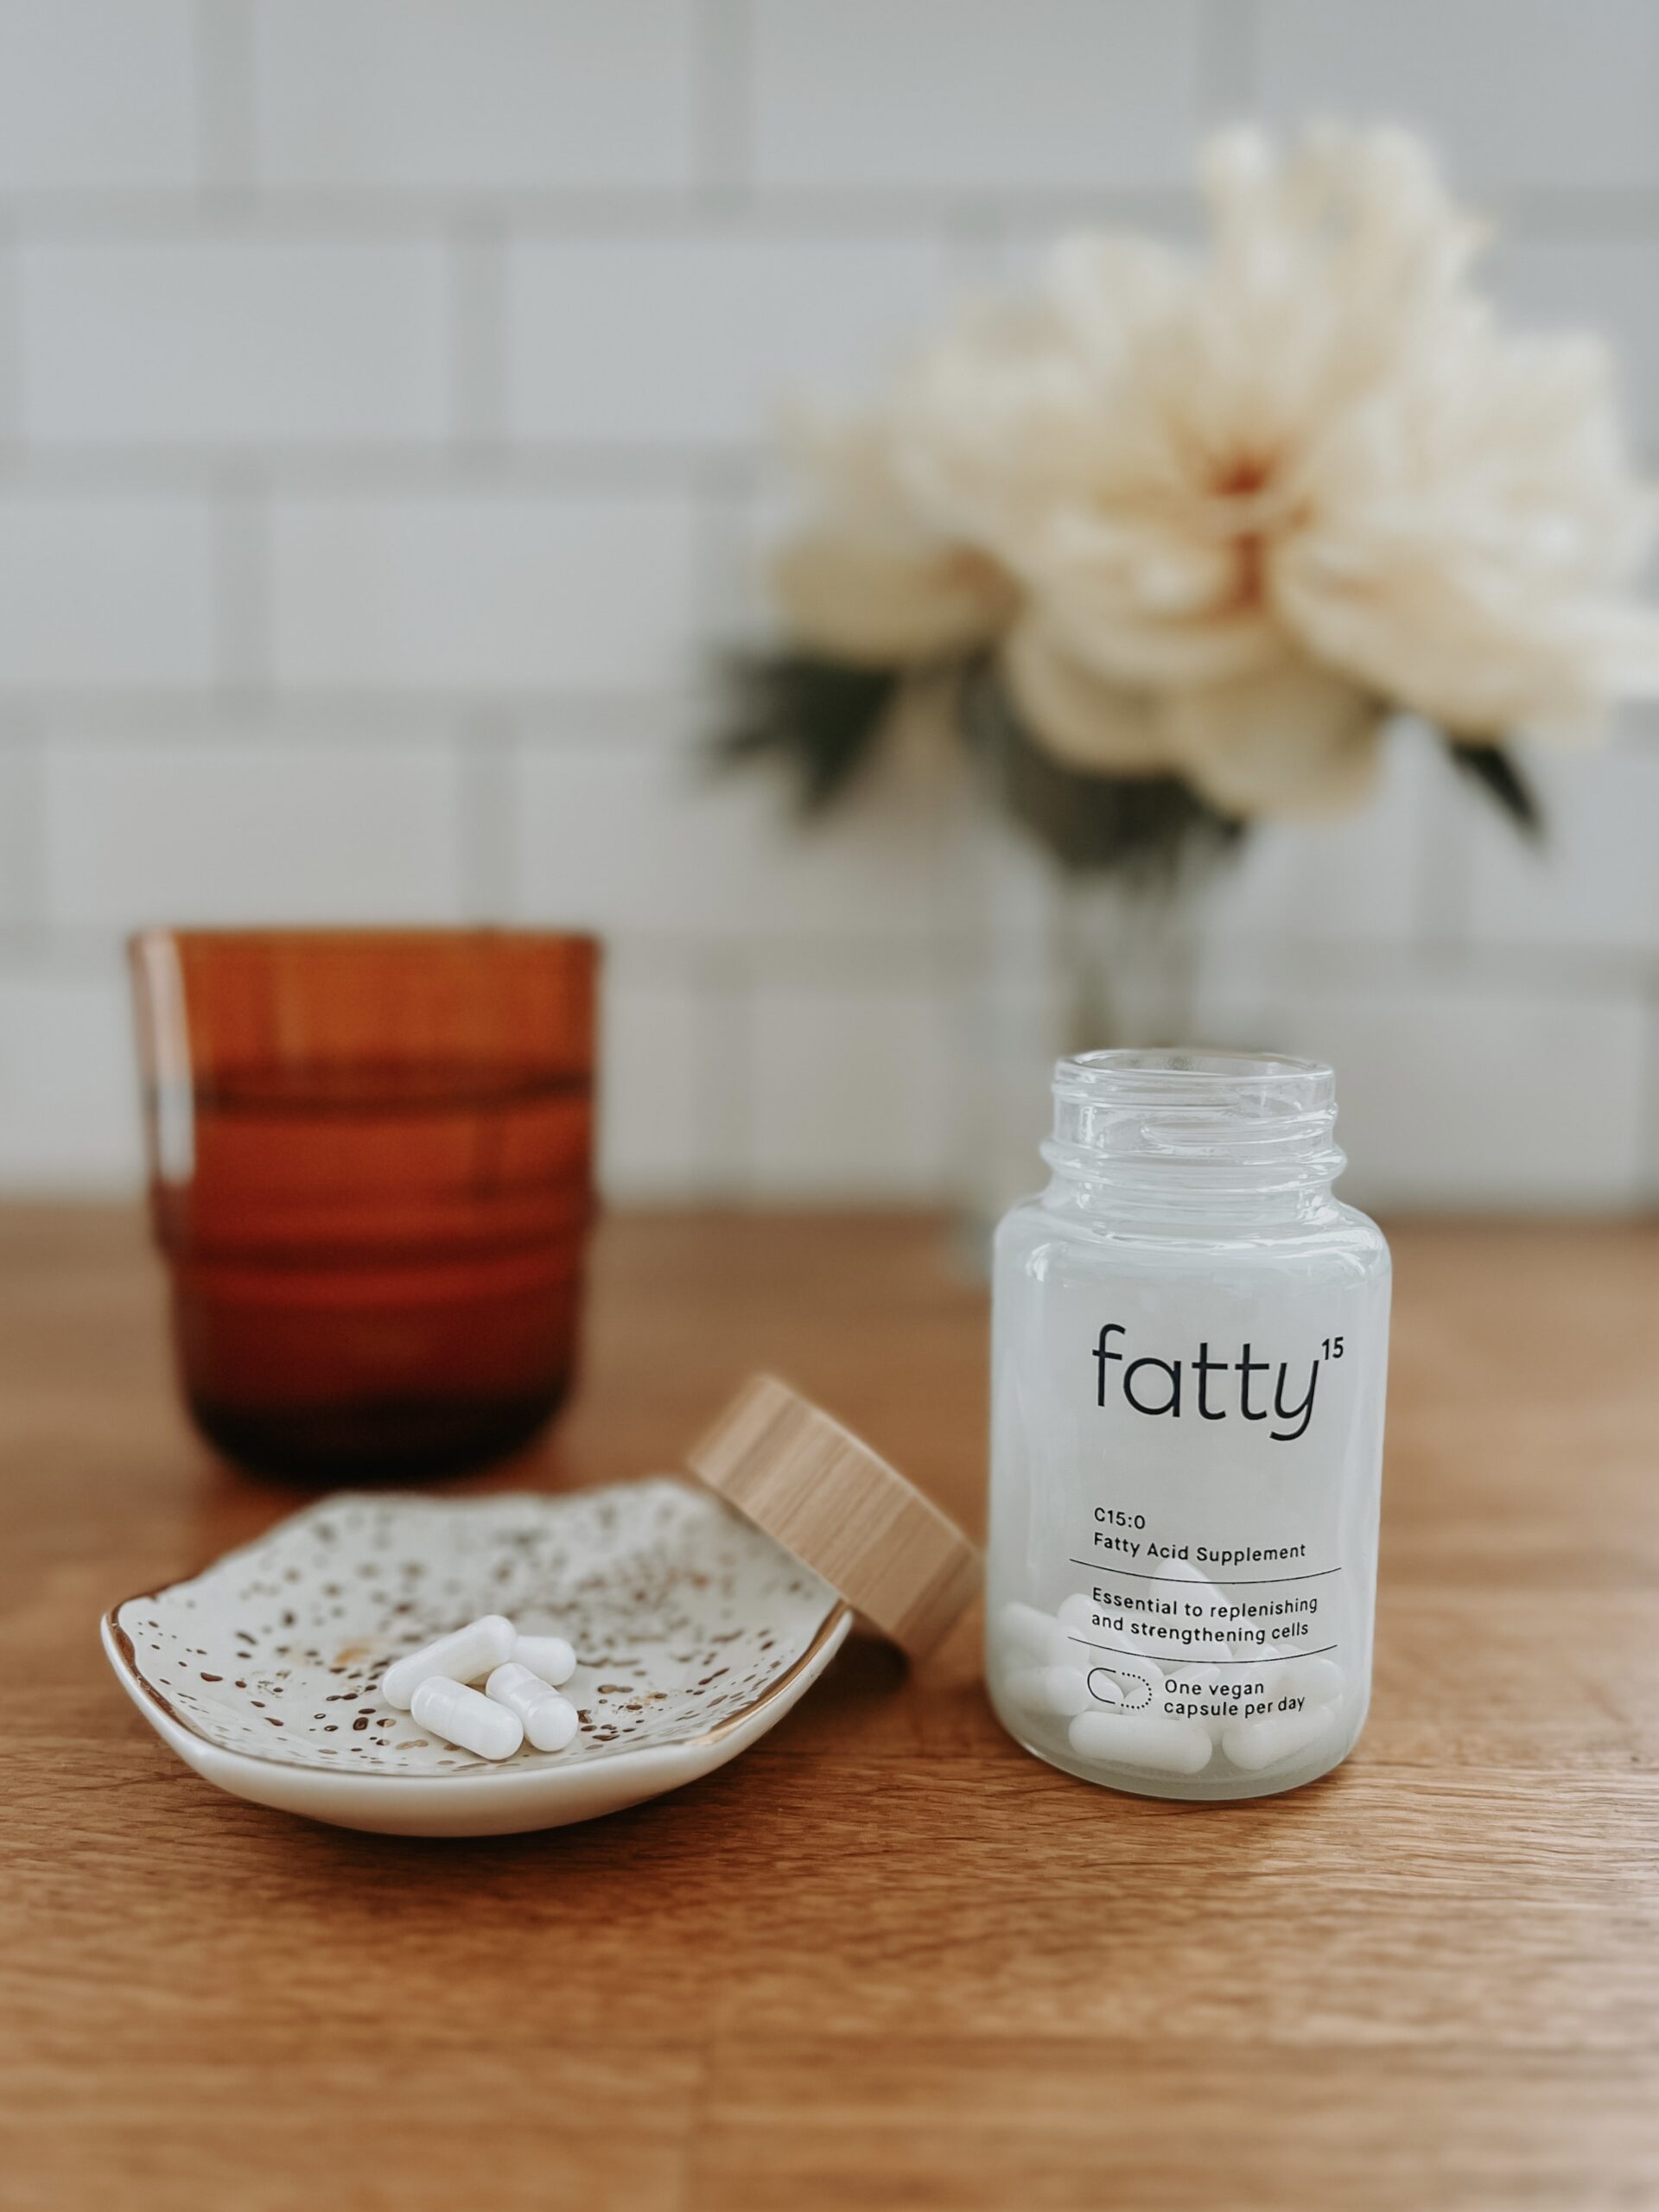 A bottle of fatty15 sits next to a small bowl of capsules.